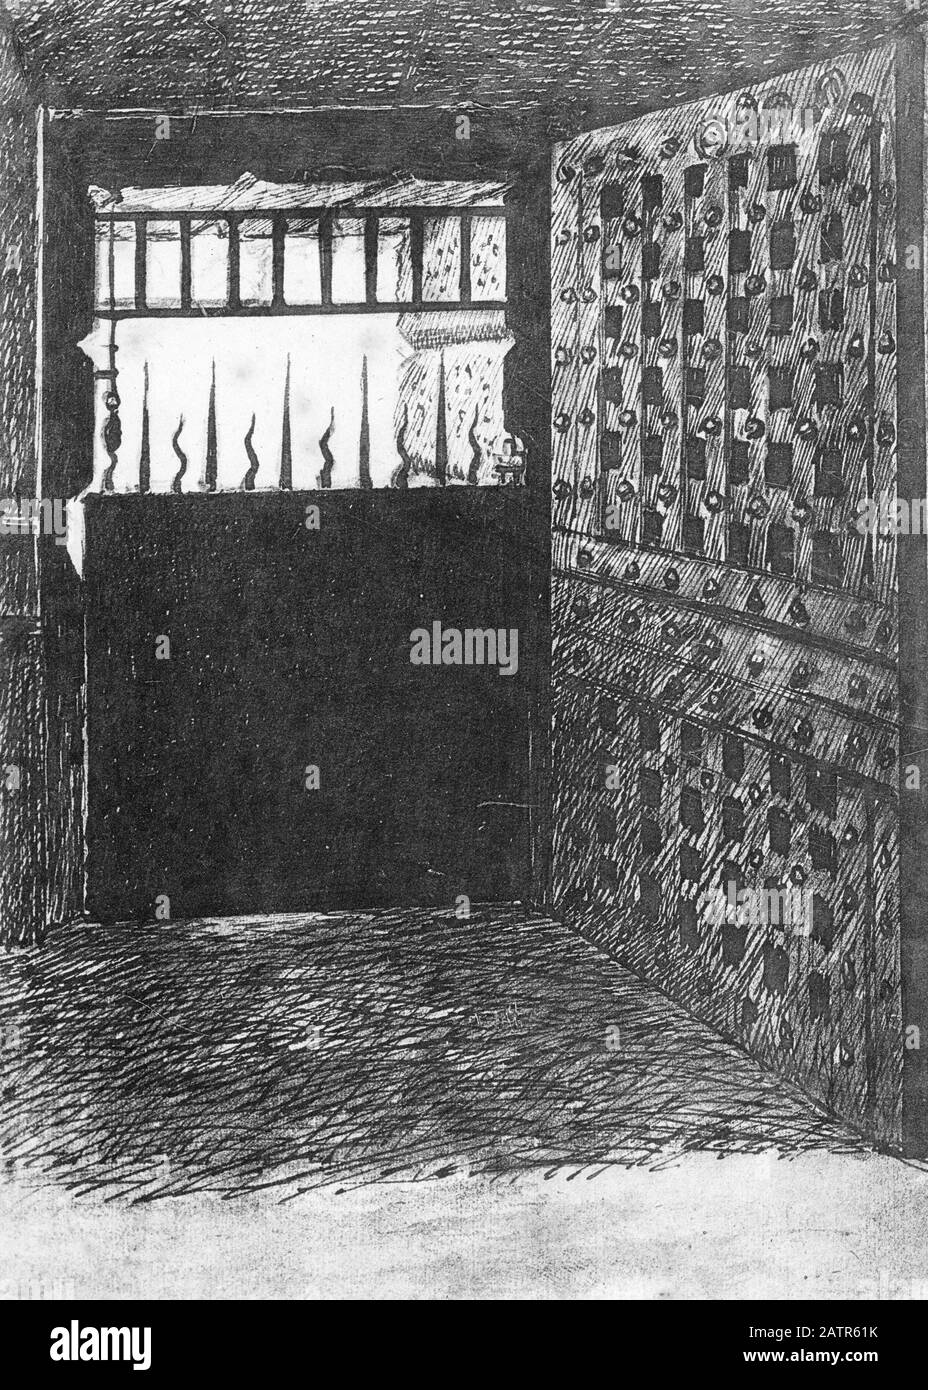 Sketch of a gate at Newgate prison, London, England, 1883. From The Chronicles of Newgate, 1884. Stock Photo